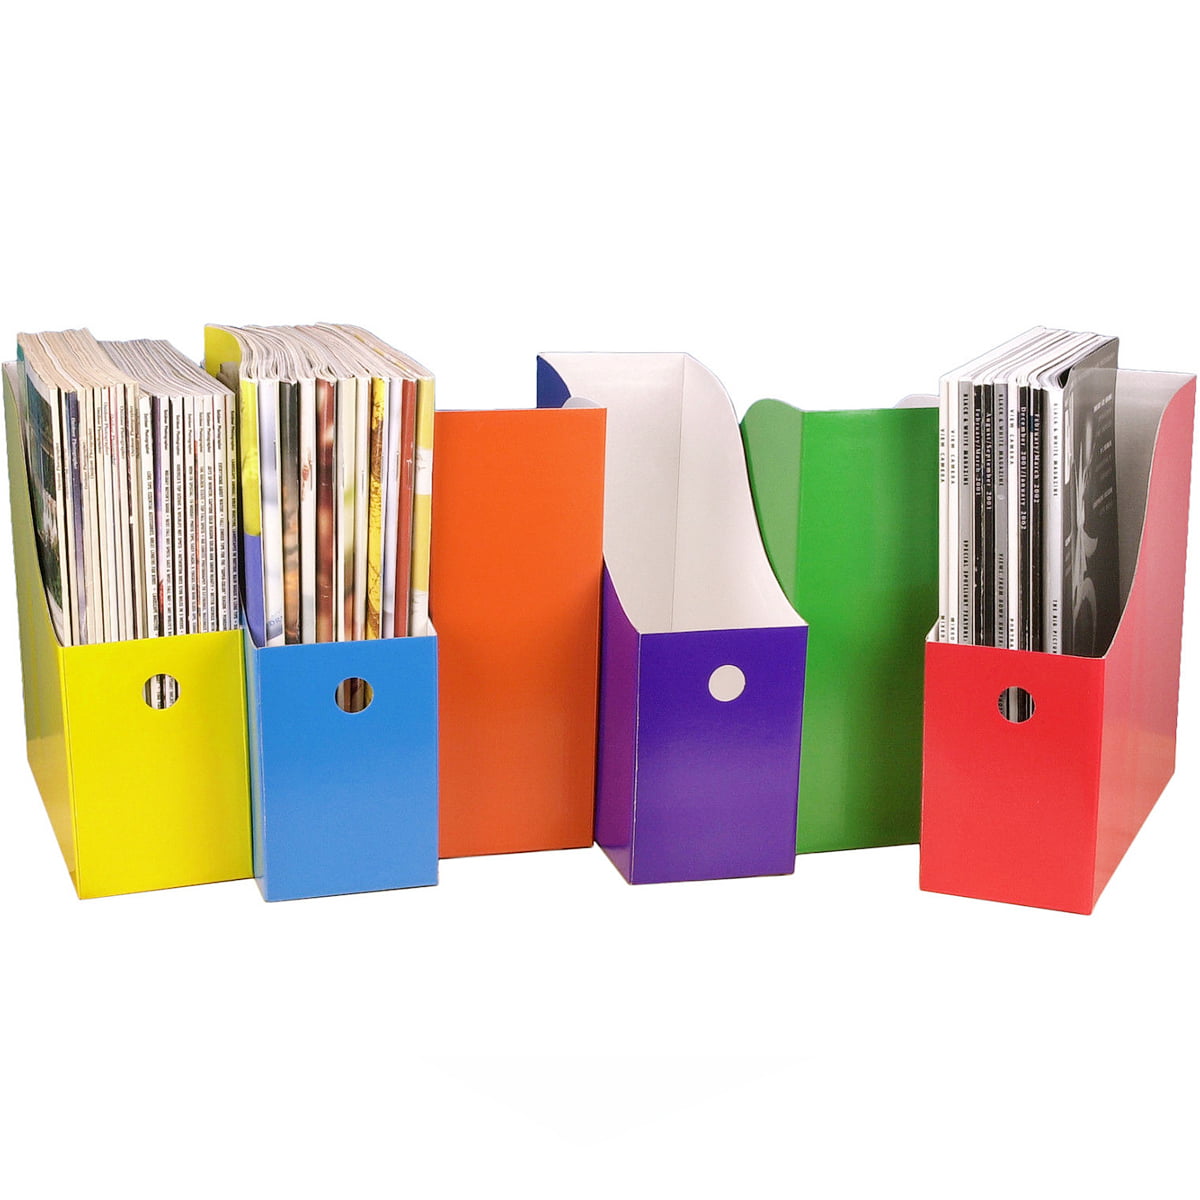 Evelots Magazine File Holder-Organizer-Full 4 Inch Wide-White-with Labels-Set/12 